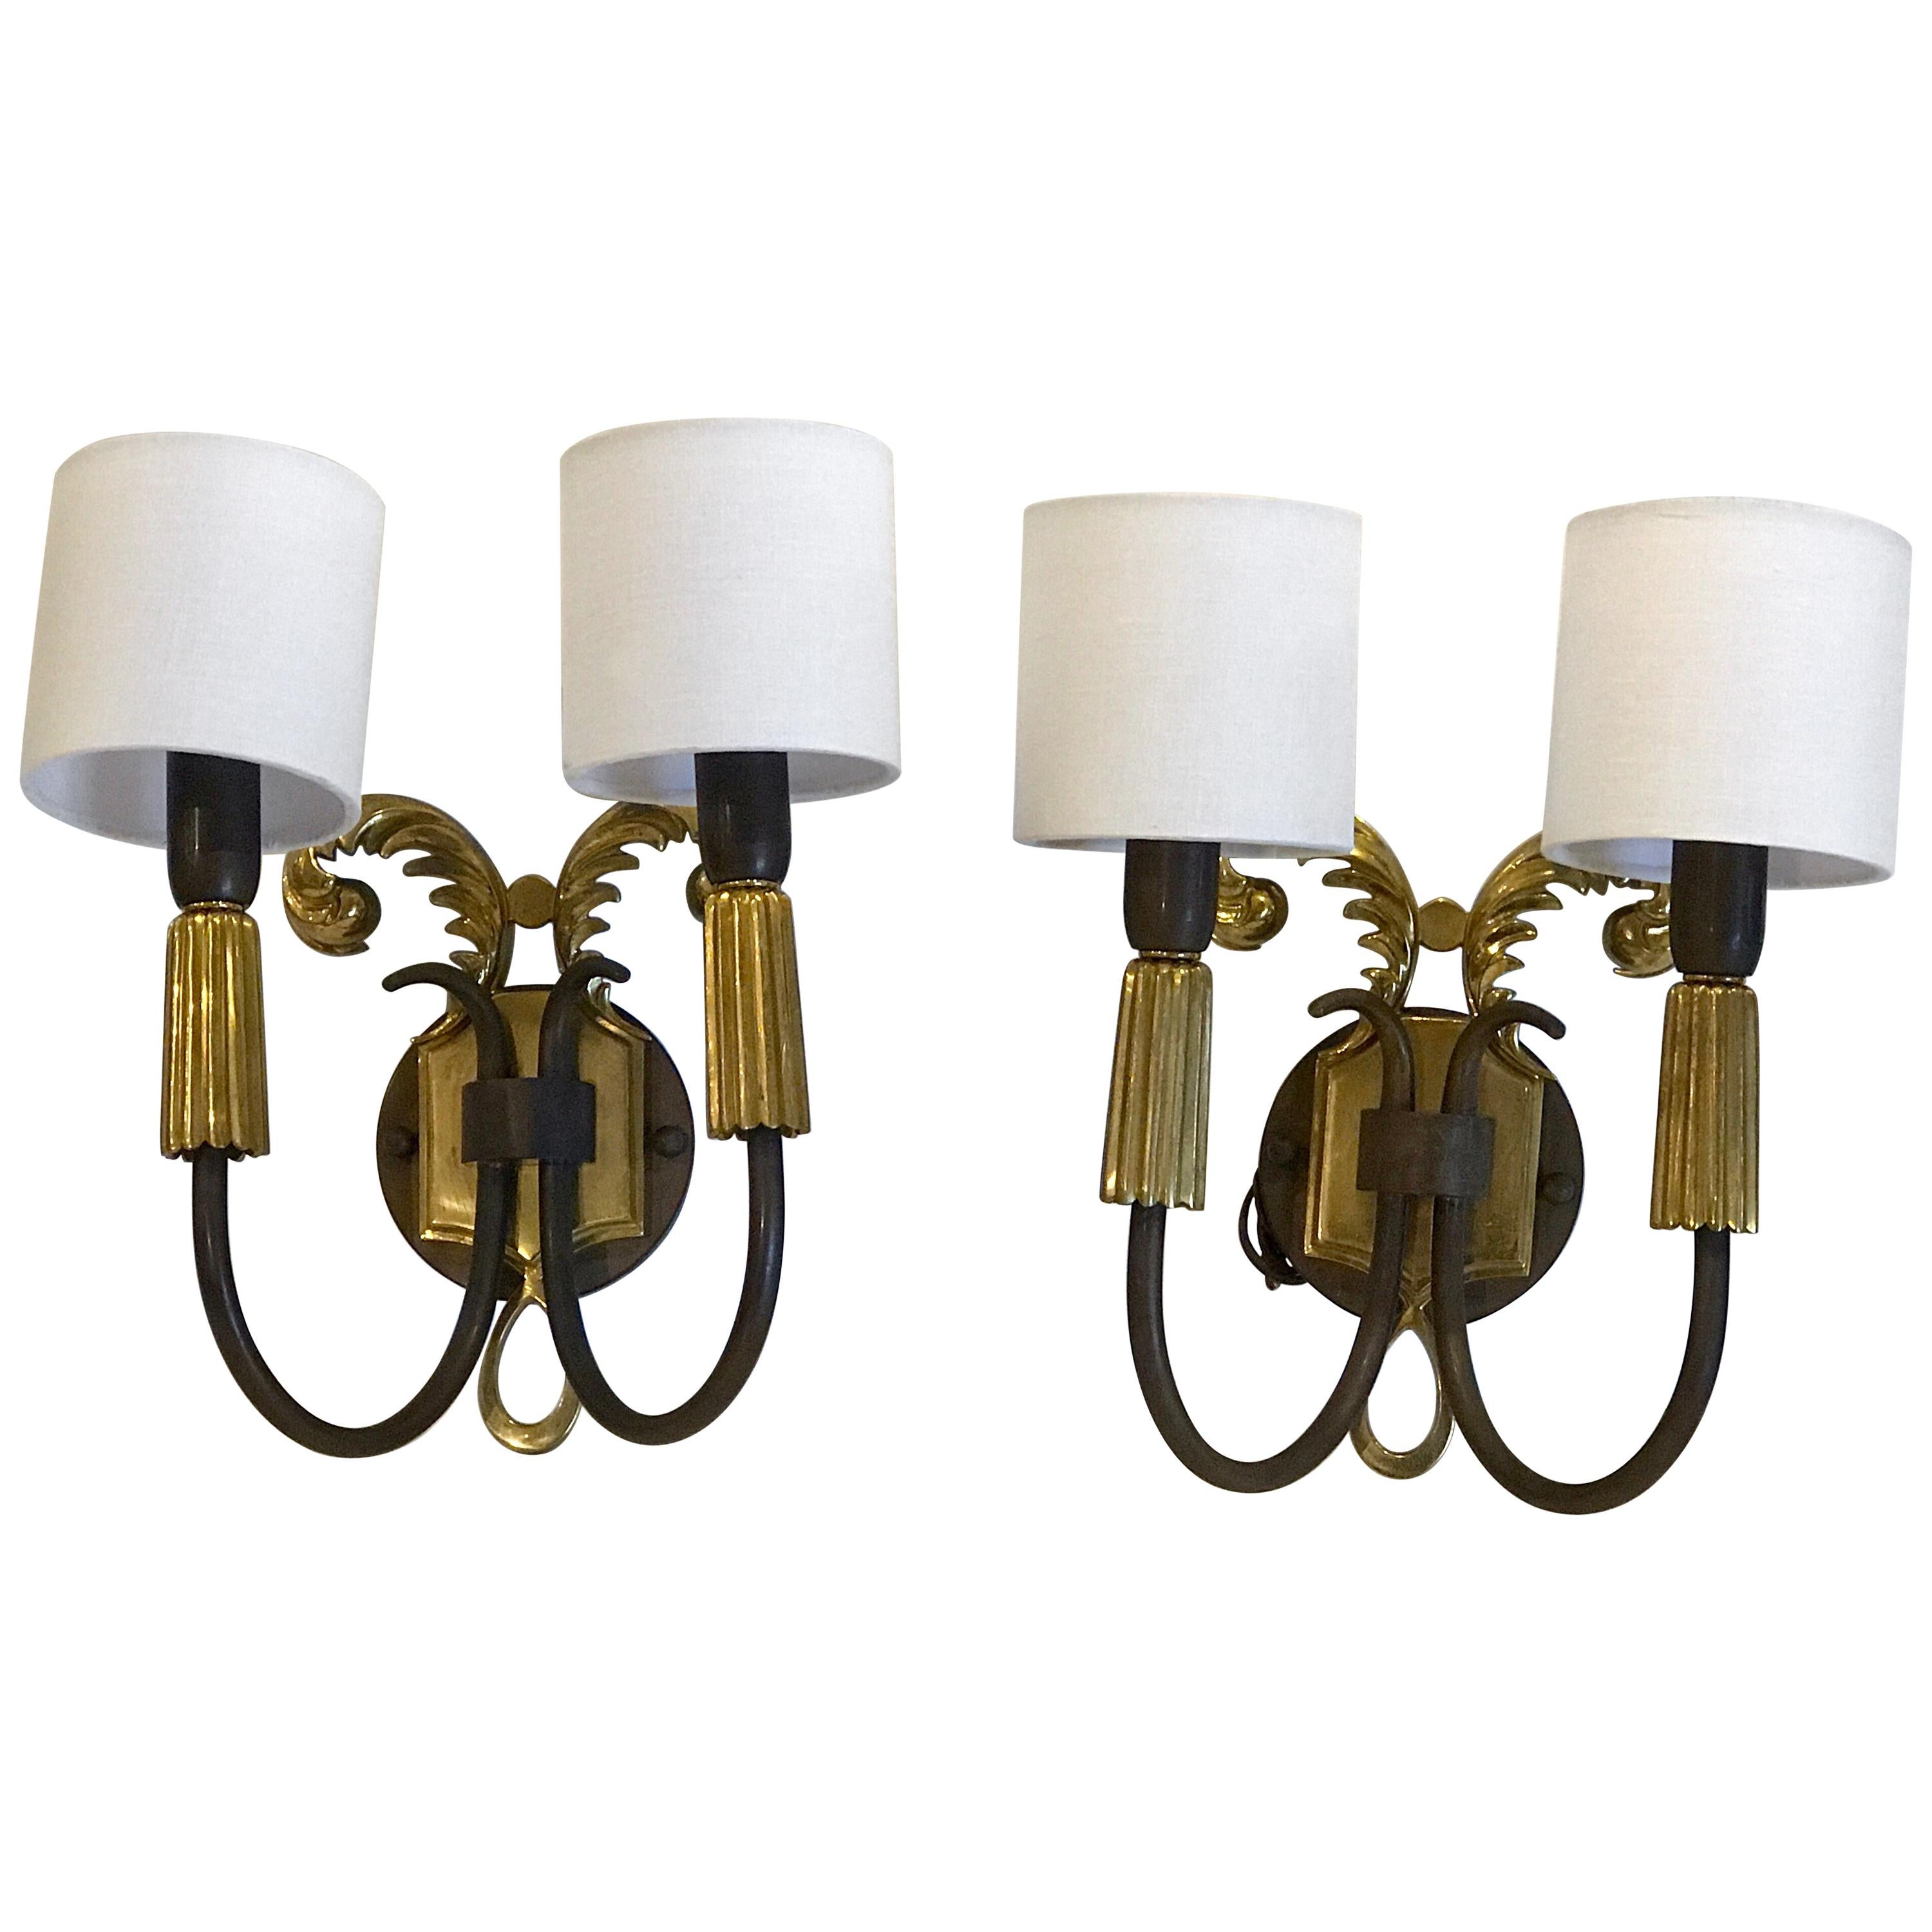 Pair of French Art Deco Gilt and Patinated Bronze Wall Sconces For Sale